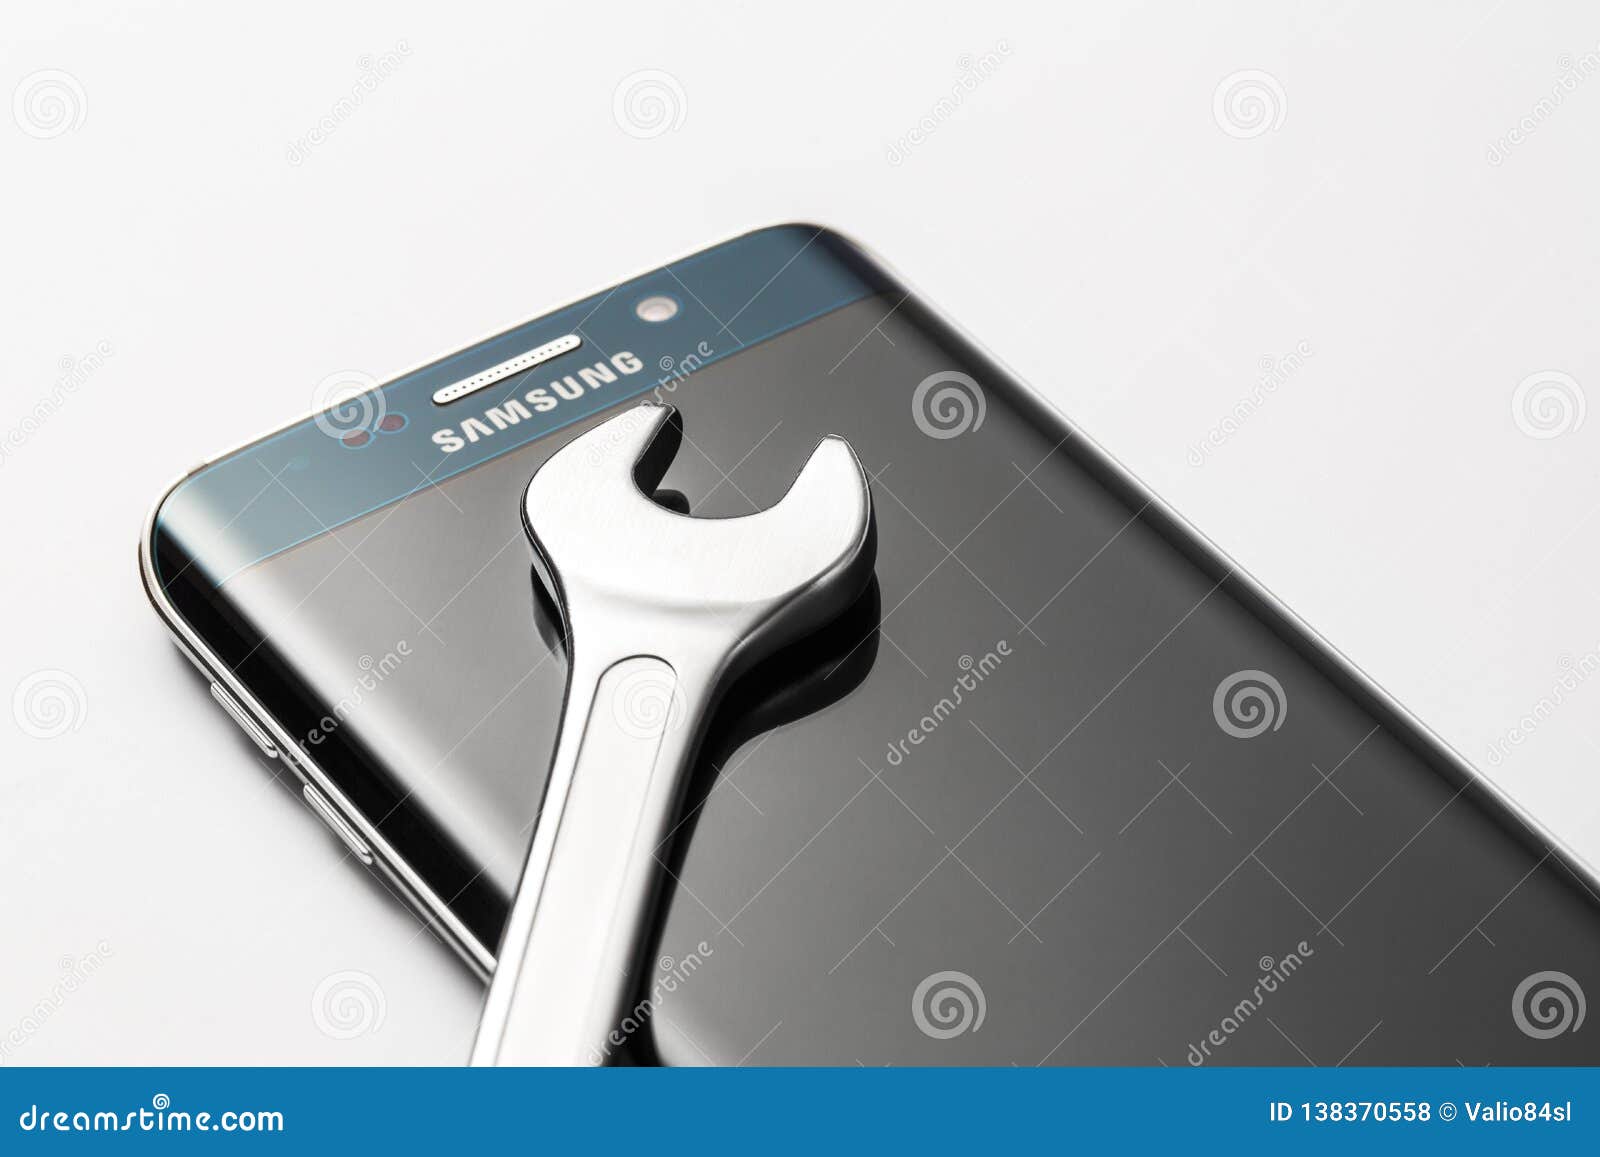 241 Samsung Repair Stock Photos Free Royalty-Free Stock Photos from  Dreamstime